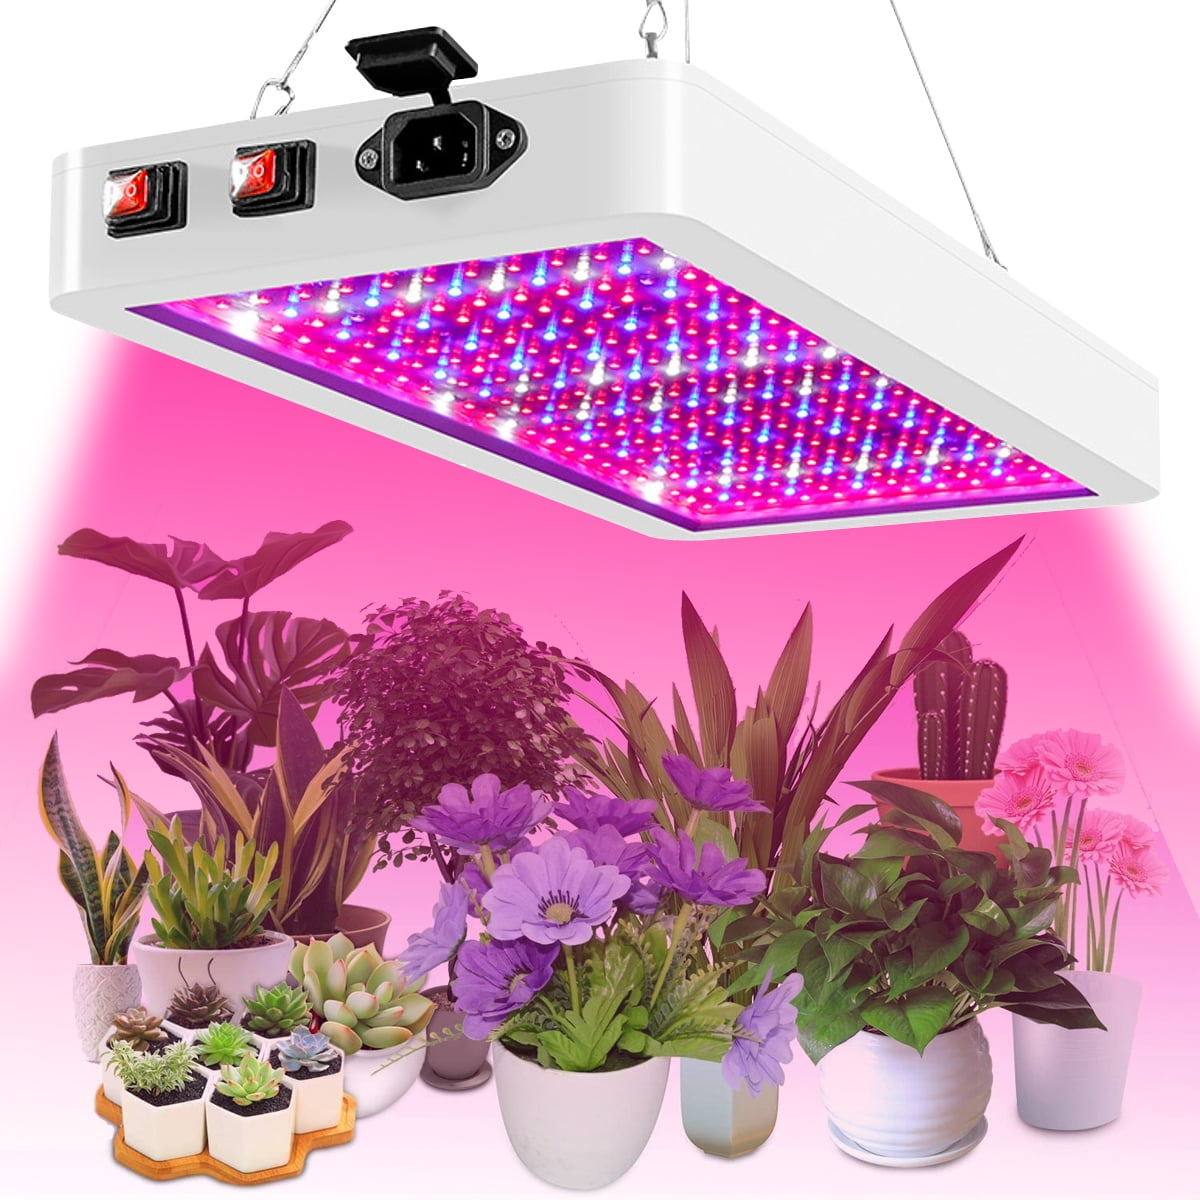 Grow Light Full Spectrum Plant Grow Lamp 216/312LEDs with IR & UV LED, Adjustable Rope Waterproof Anti-leakage for Veg Greenhouse, Micro Greens And Flower Clones,Succulents,Seedlings - Walmart.com